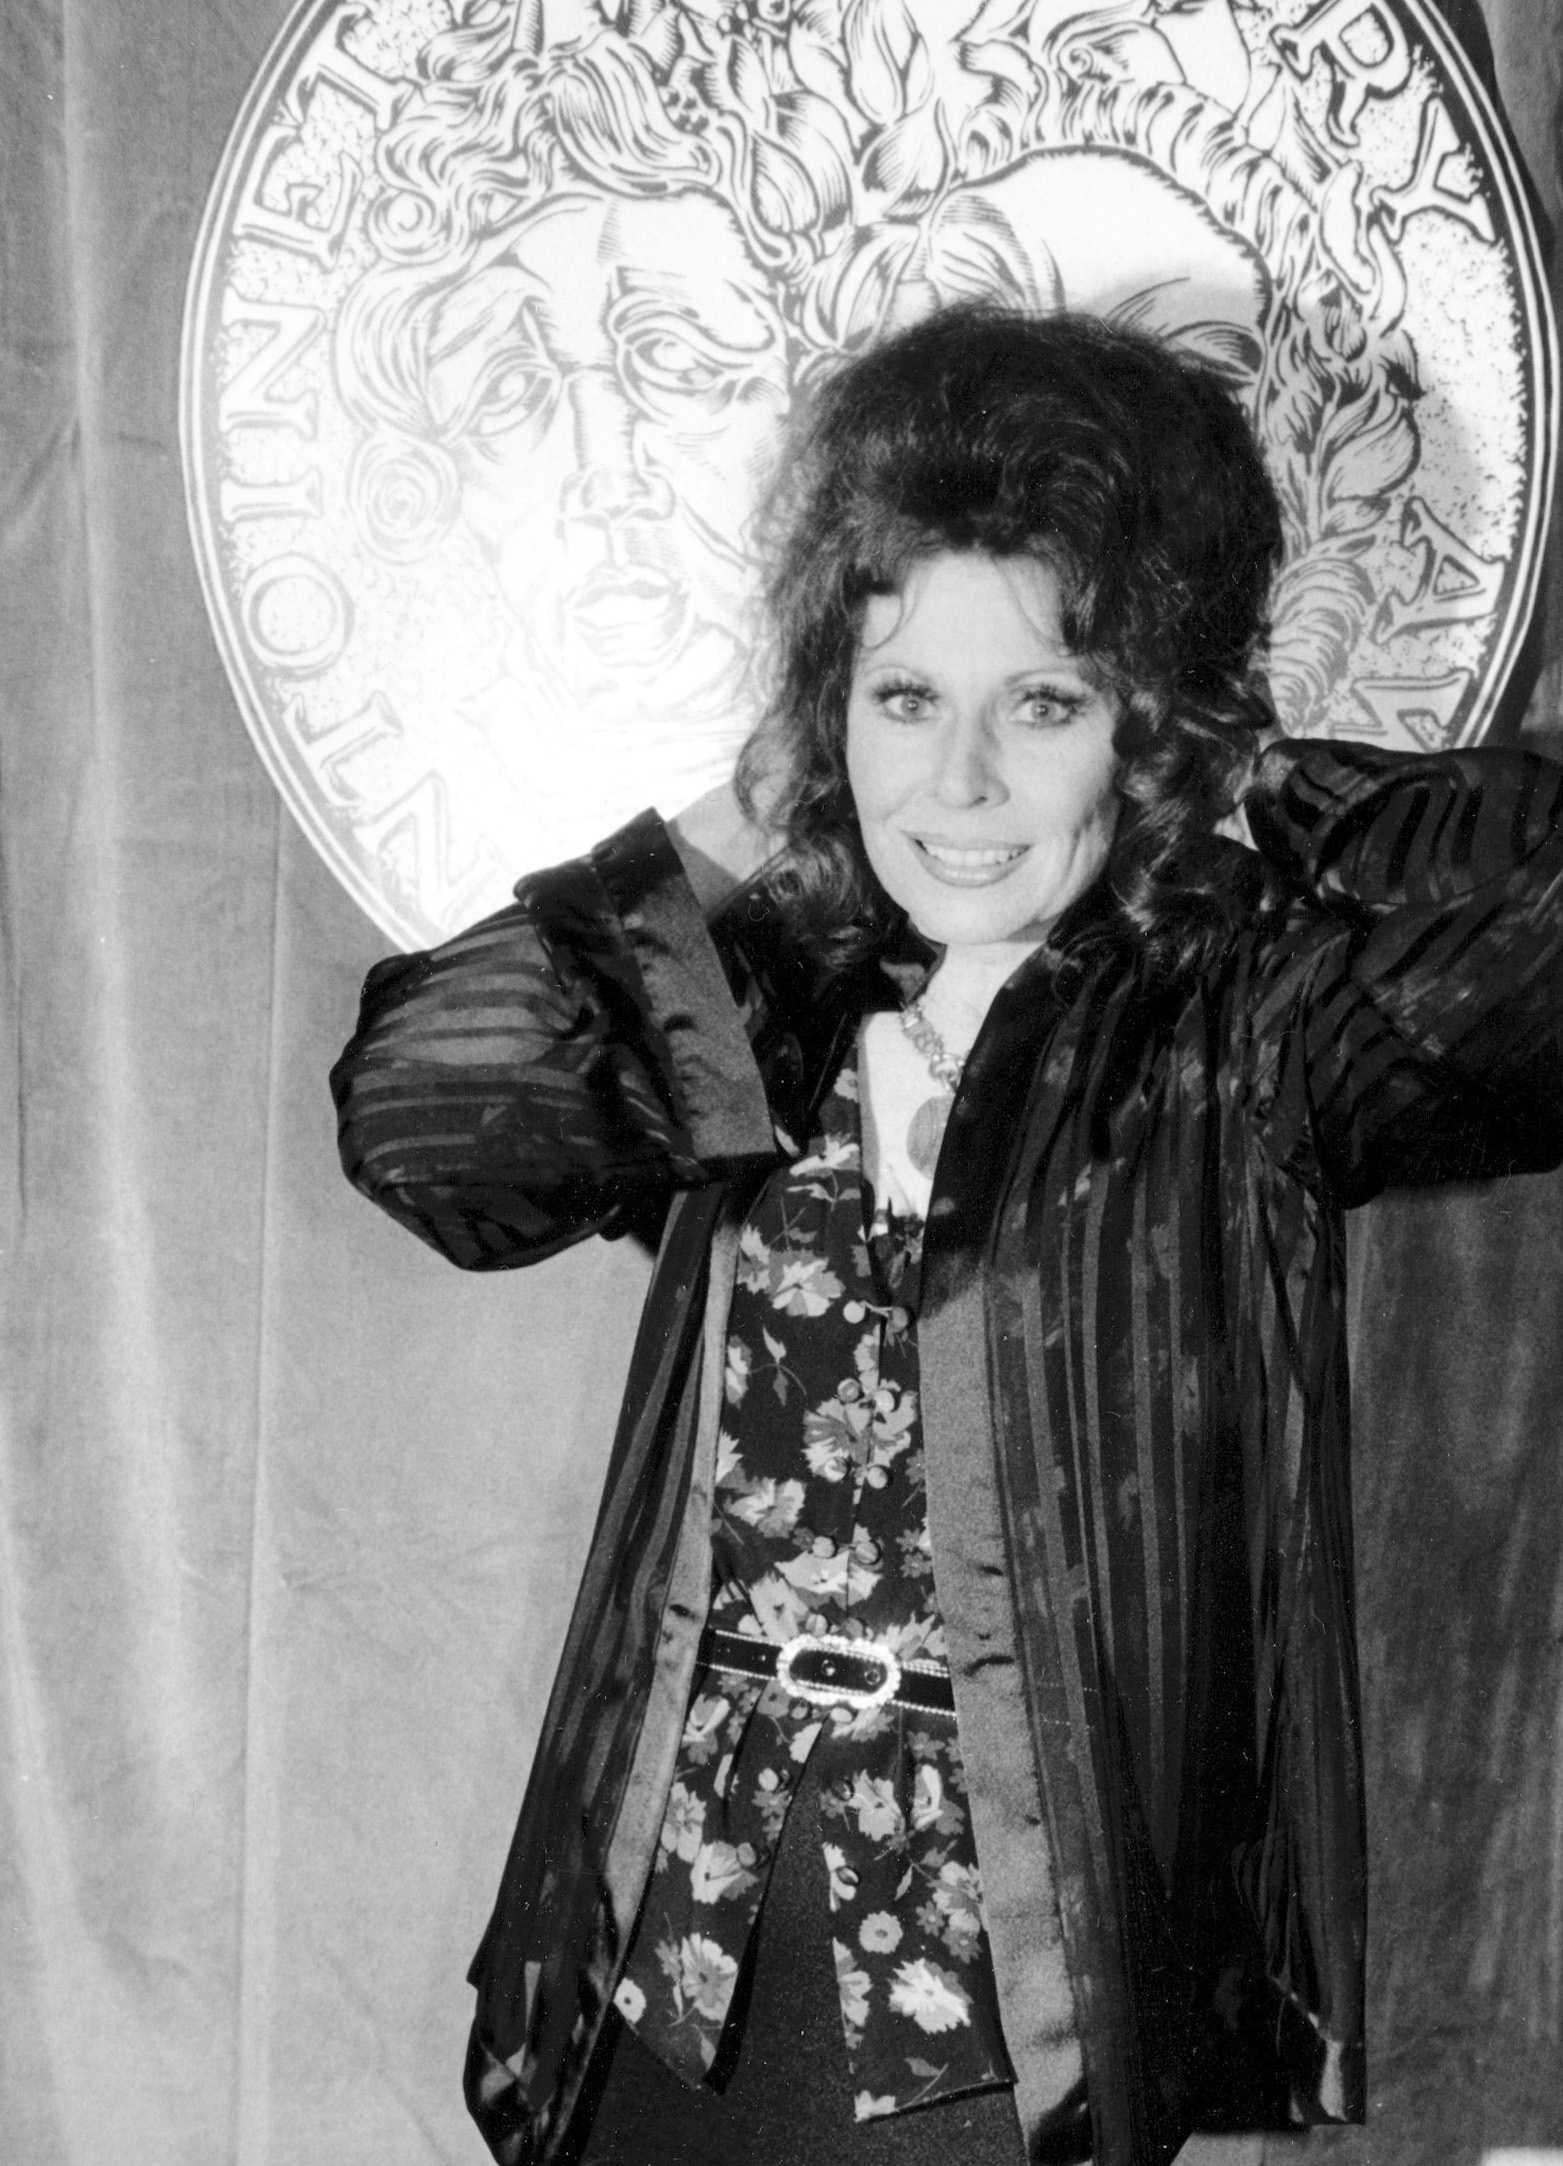 Ann Wedgeworth, known for 'Three's Company' role, dies at 83